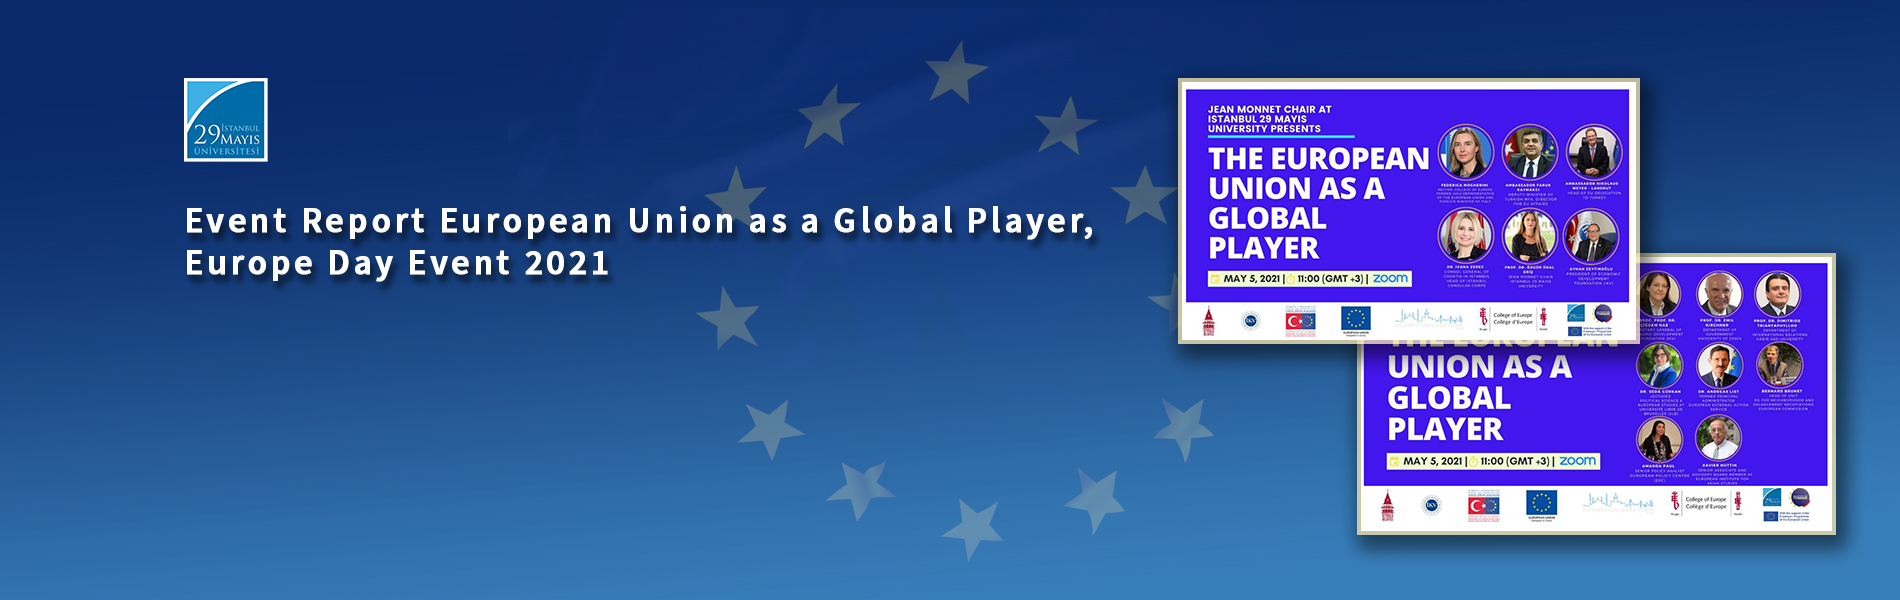 Event Report European Union as a Global Player, Europe Day Event 2021